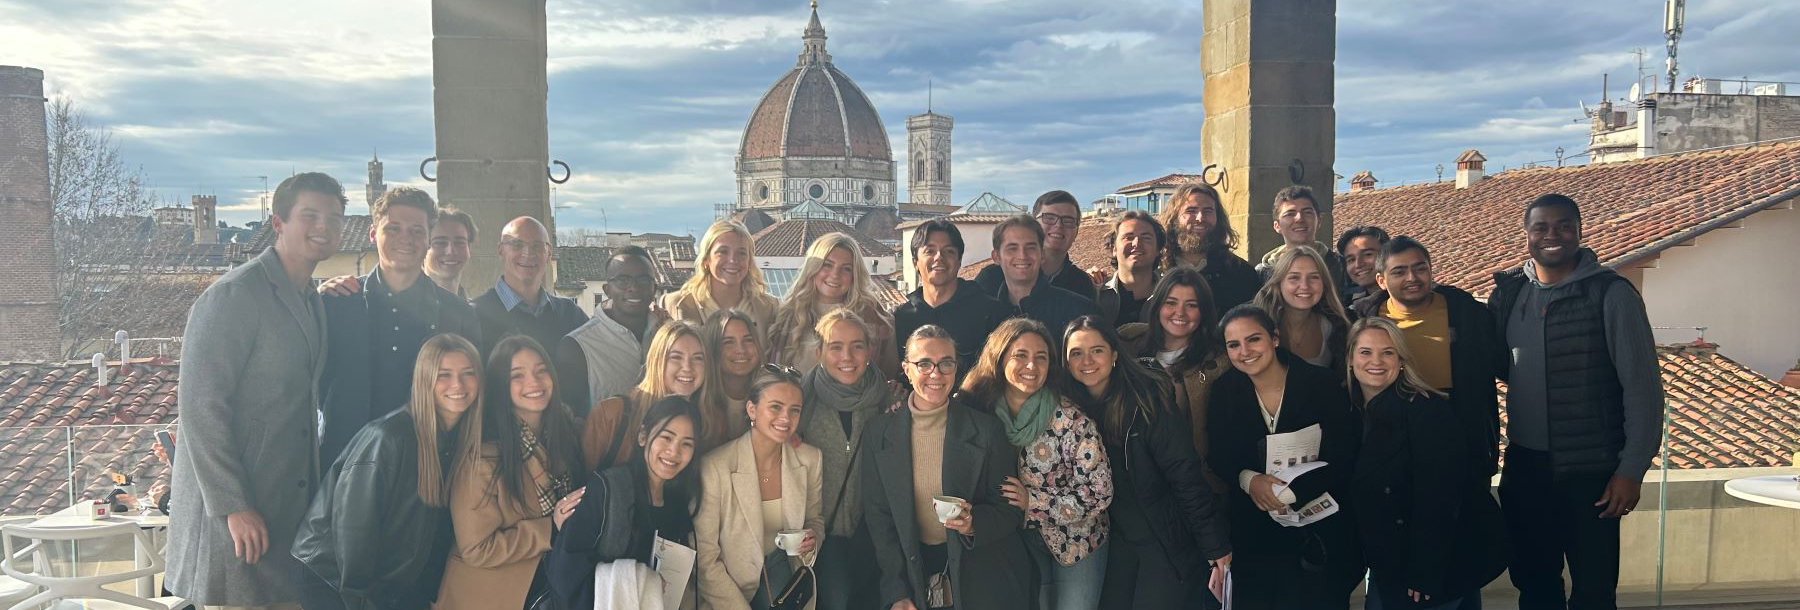 Section Image: Neeley Leaders in Florence Italy 